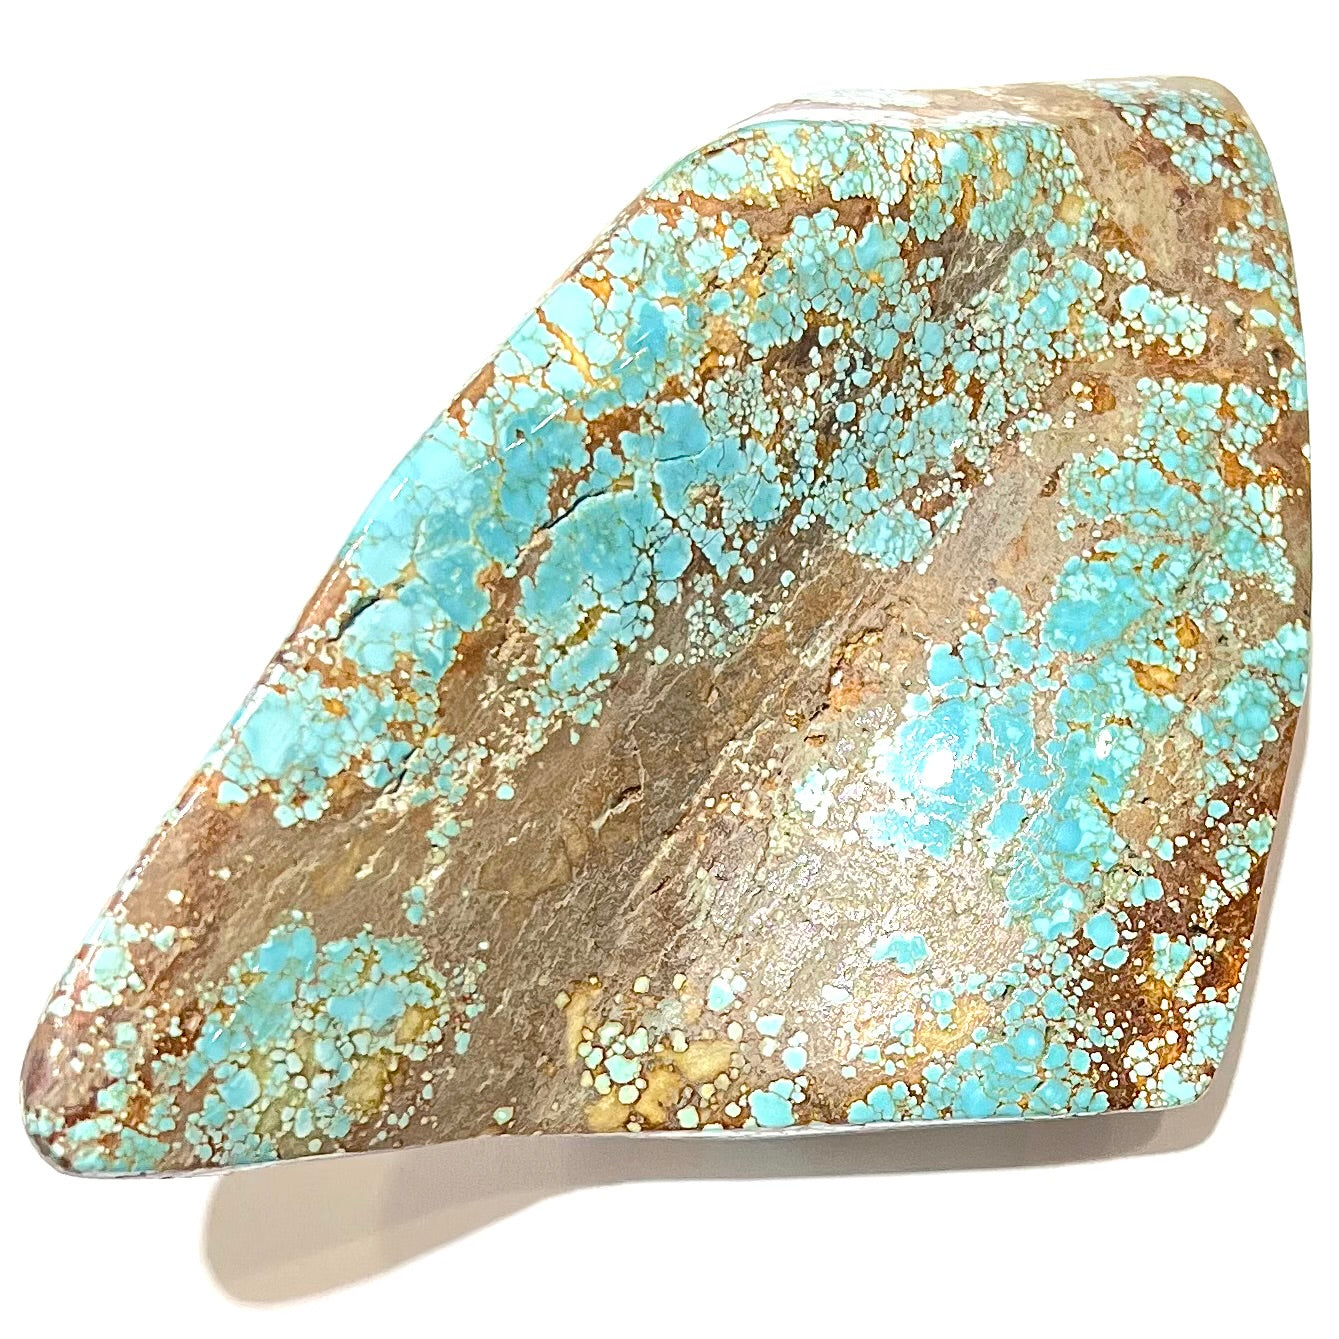 A polished Cripple Creek turquoise specimen from Teller County, Colorado.